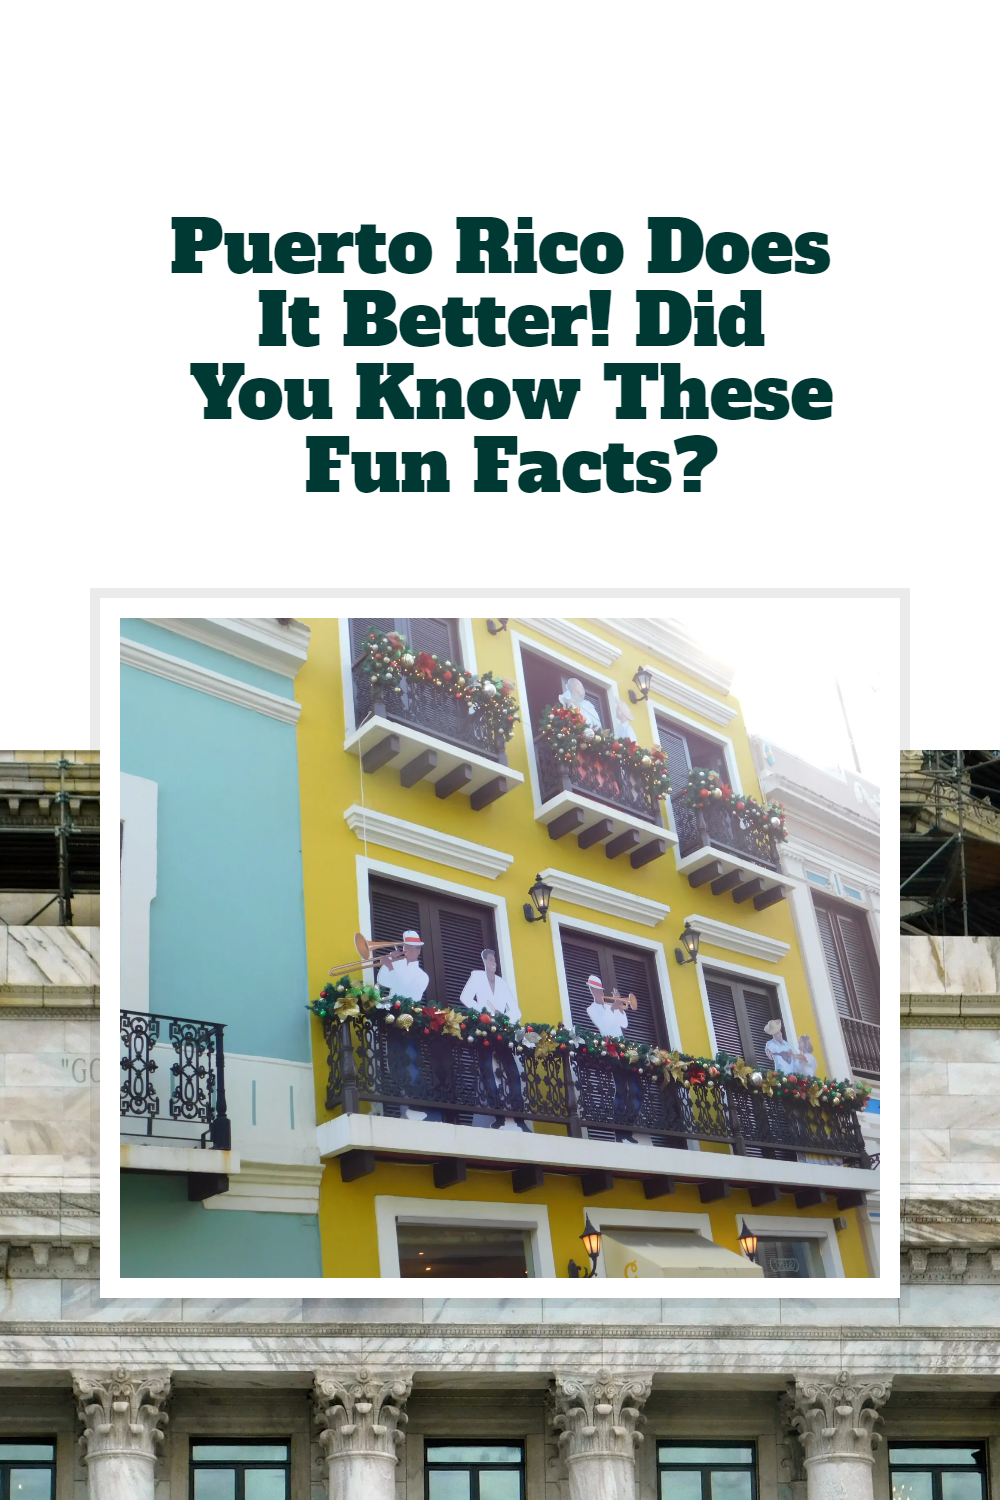 Puerto Rico Does It Better! Did You Know These Fun Facts?